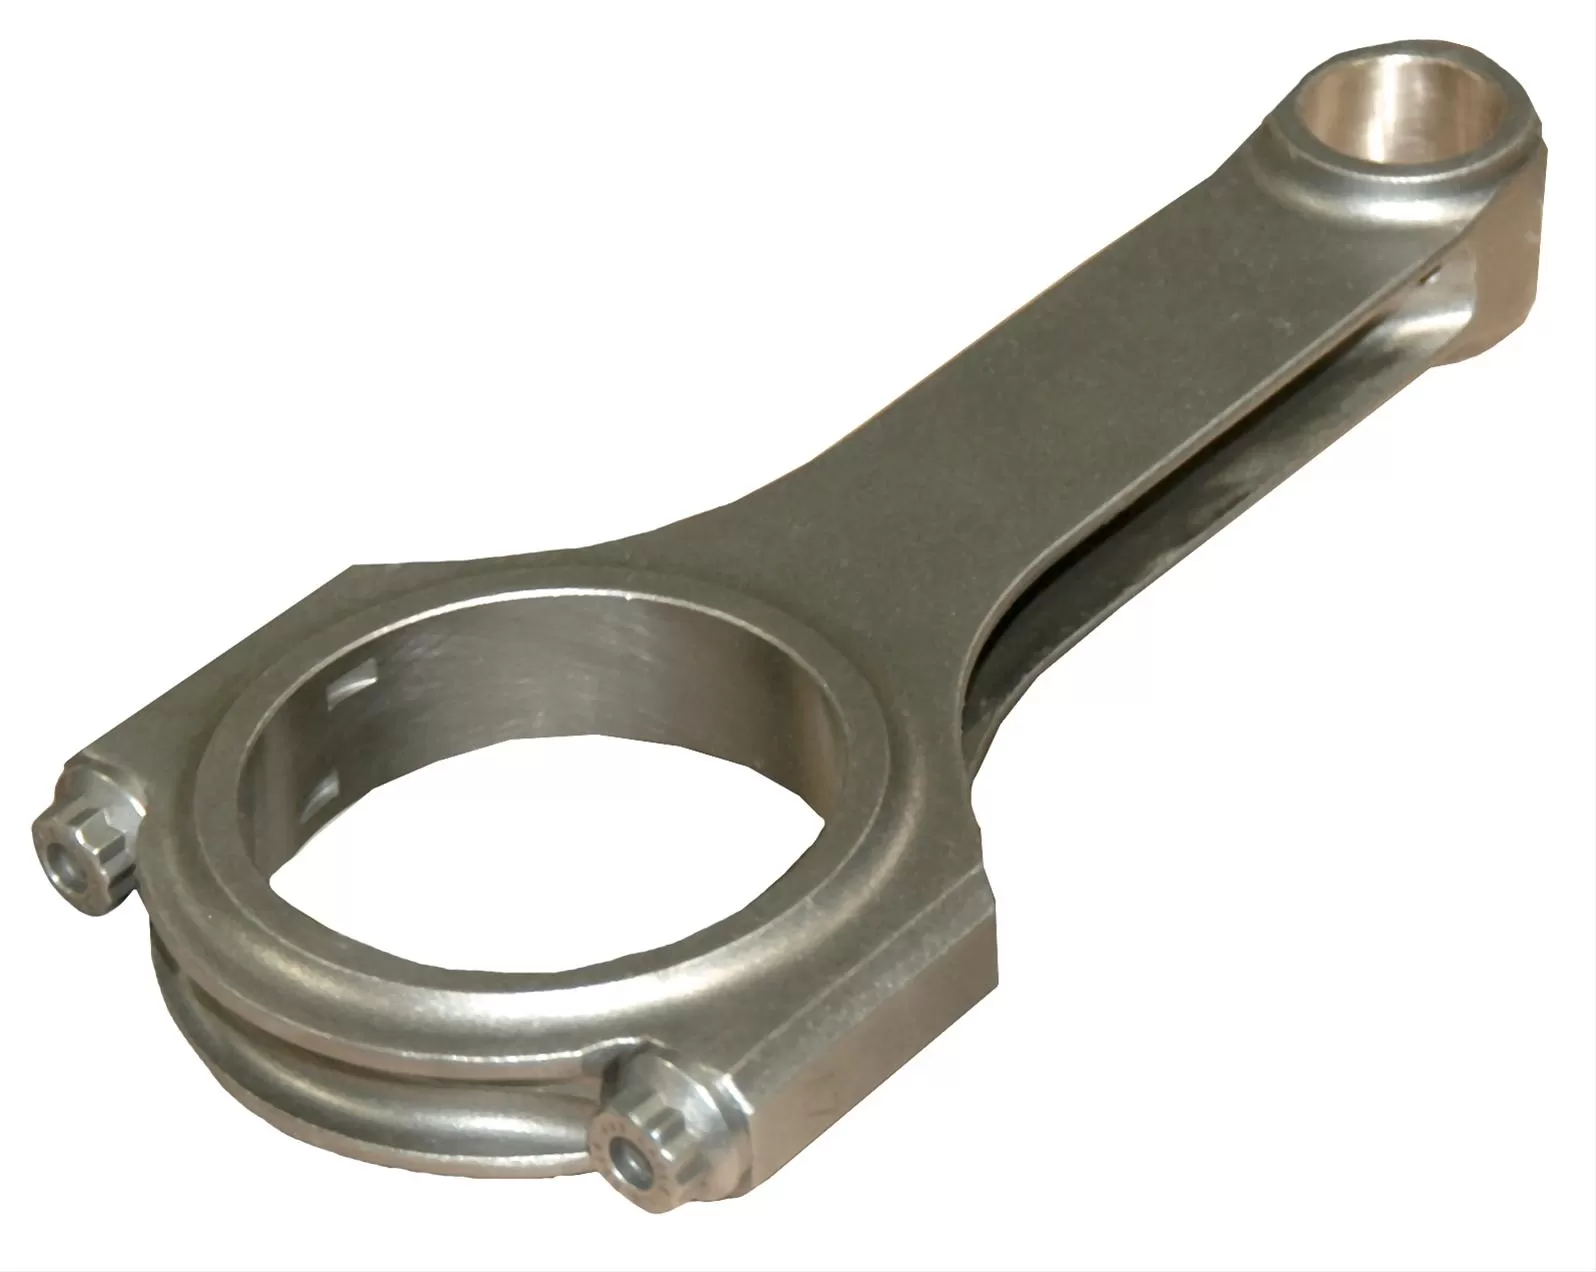 Eagle Specialty Prod Forged 4340 Steel H-Beam 6.125in Connecting Rods Chevrolet Small Block ESP Set of 8 - CRS6125B3D